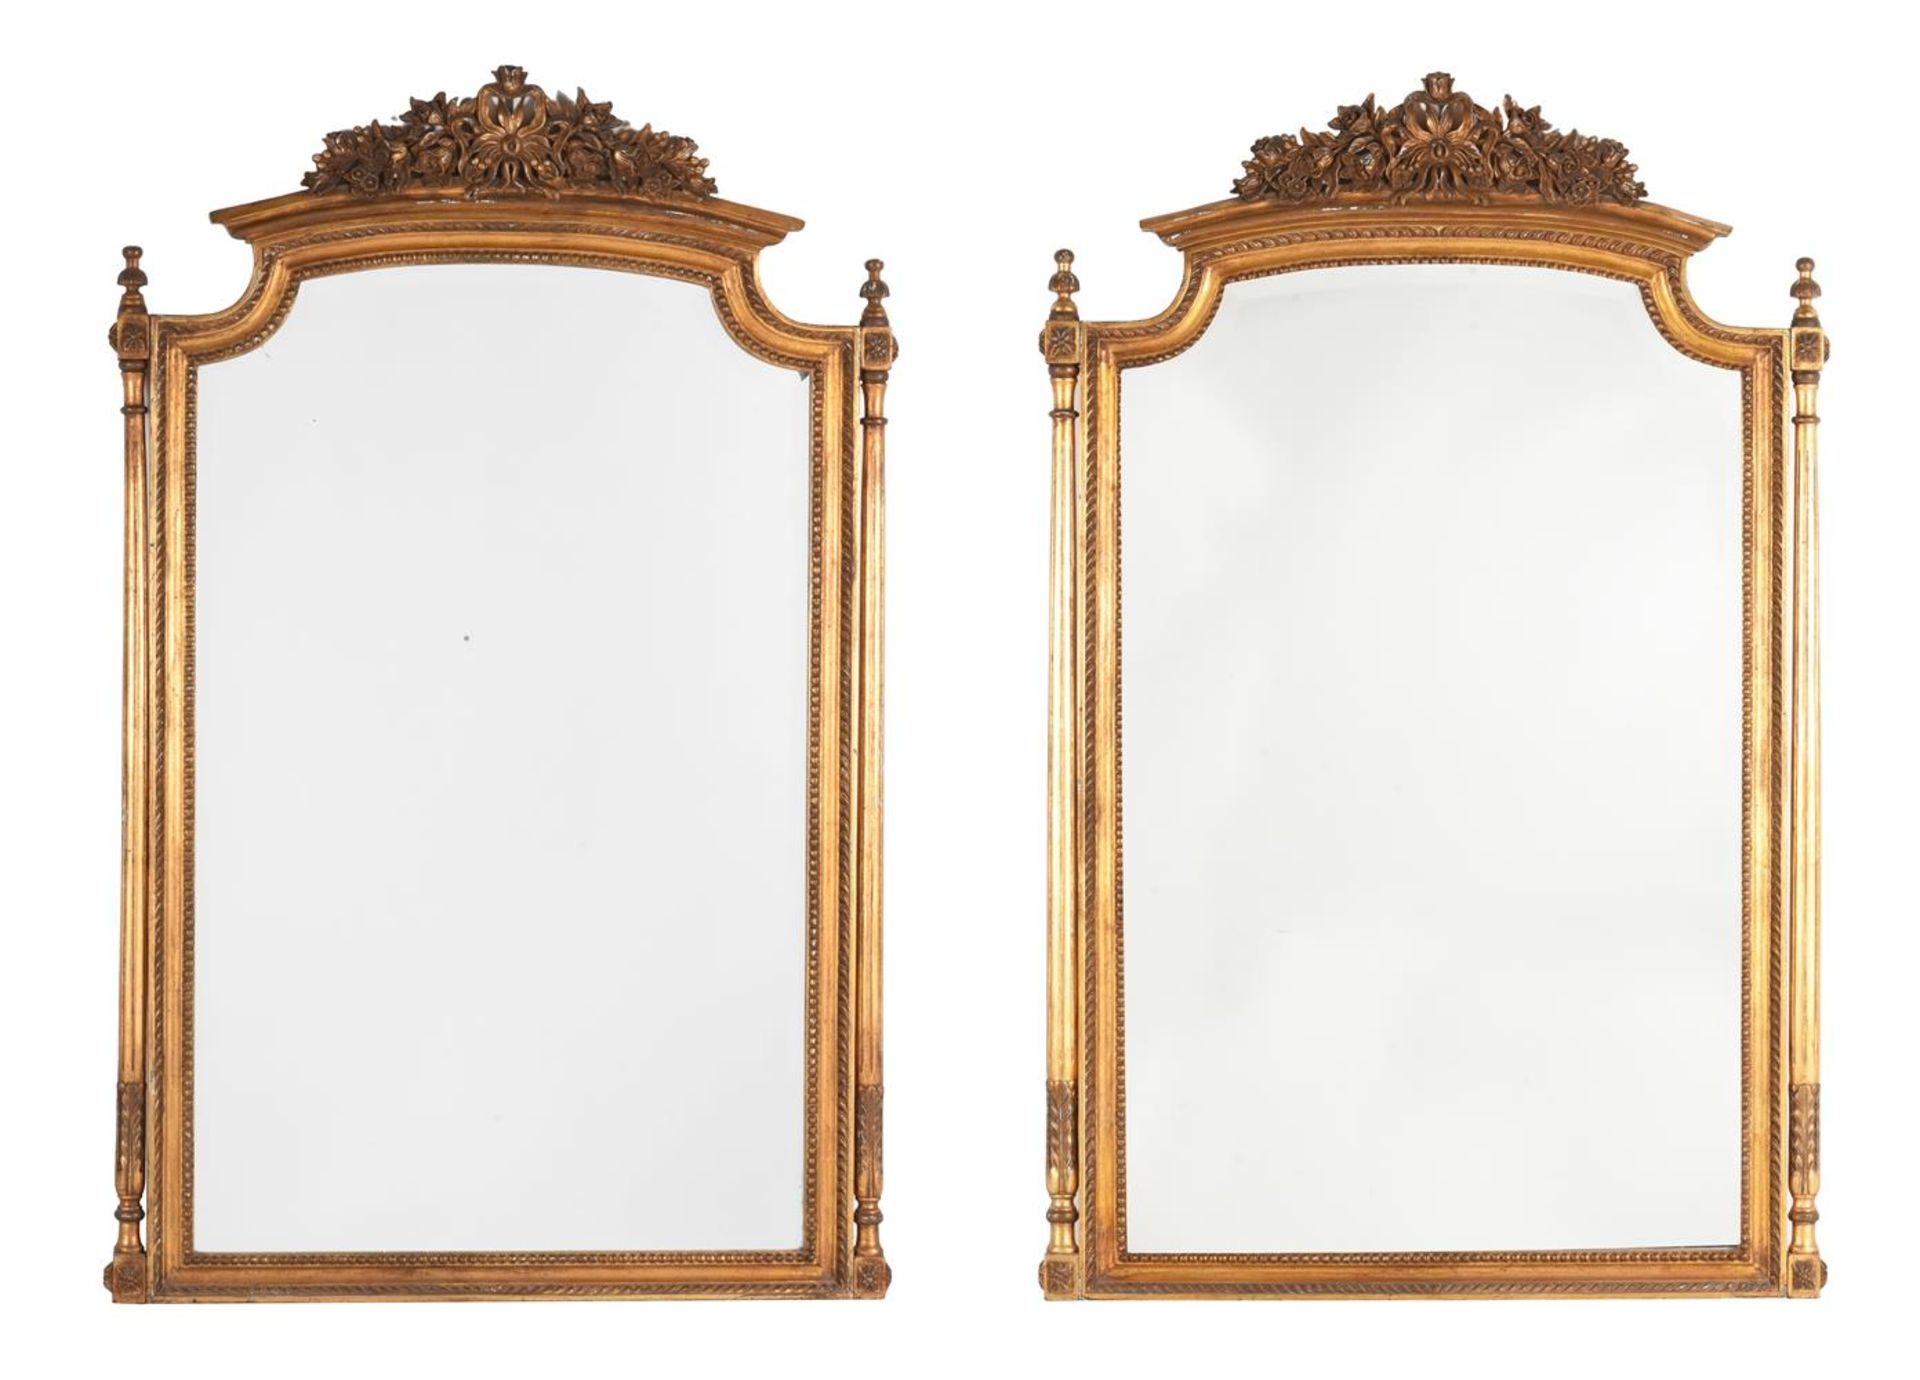 A PAIR OF GILTWOOD WALL MIRRORS IN FRENCH TRANSITIONAL STYLE